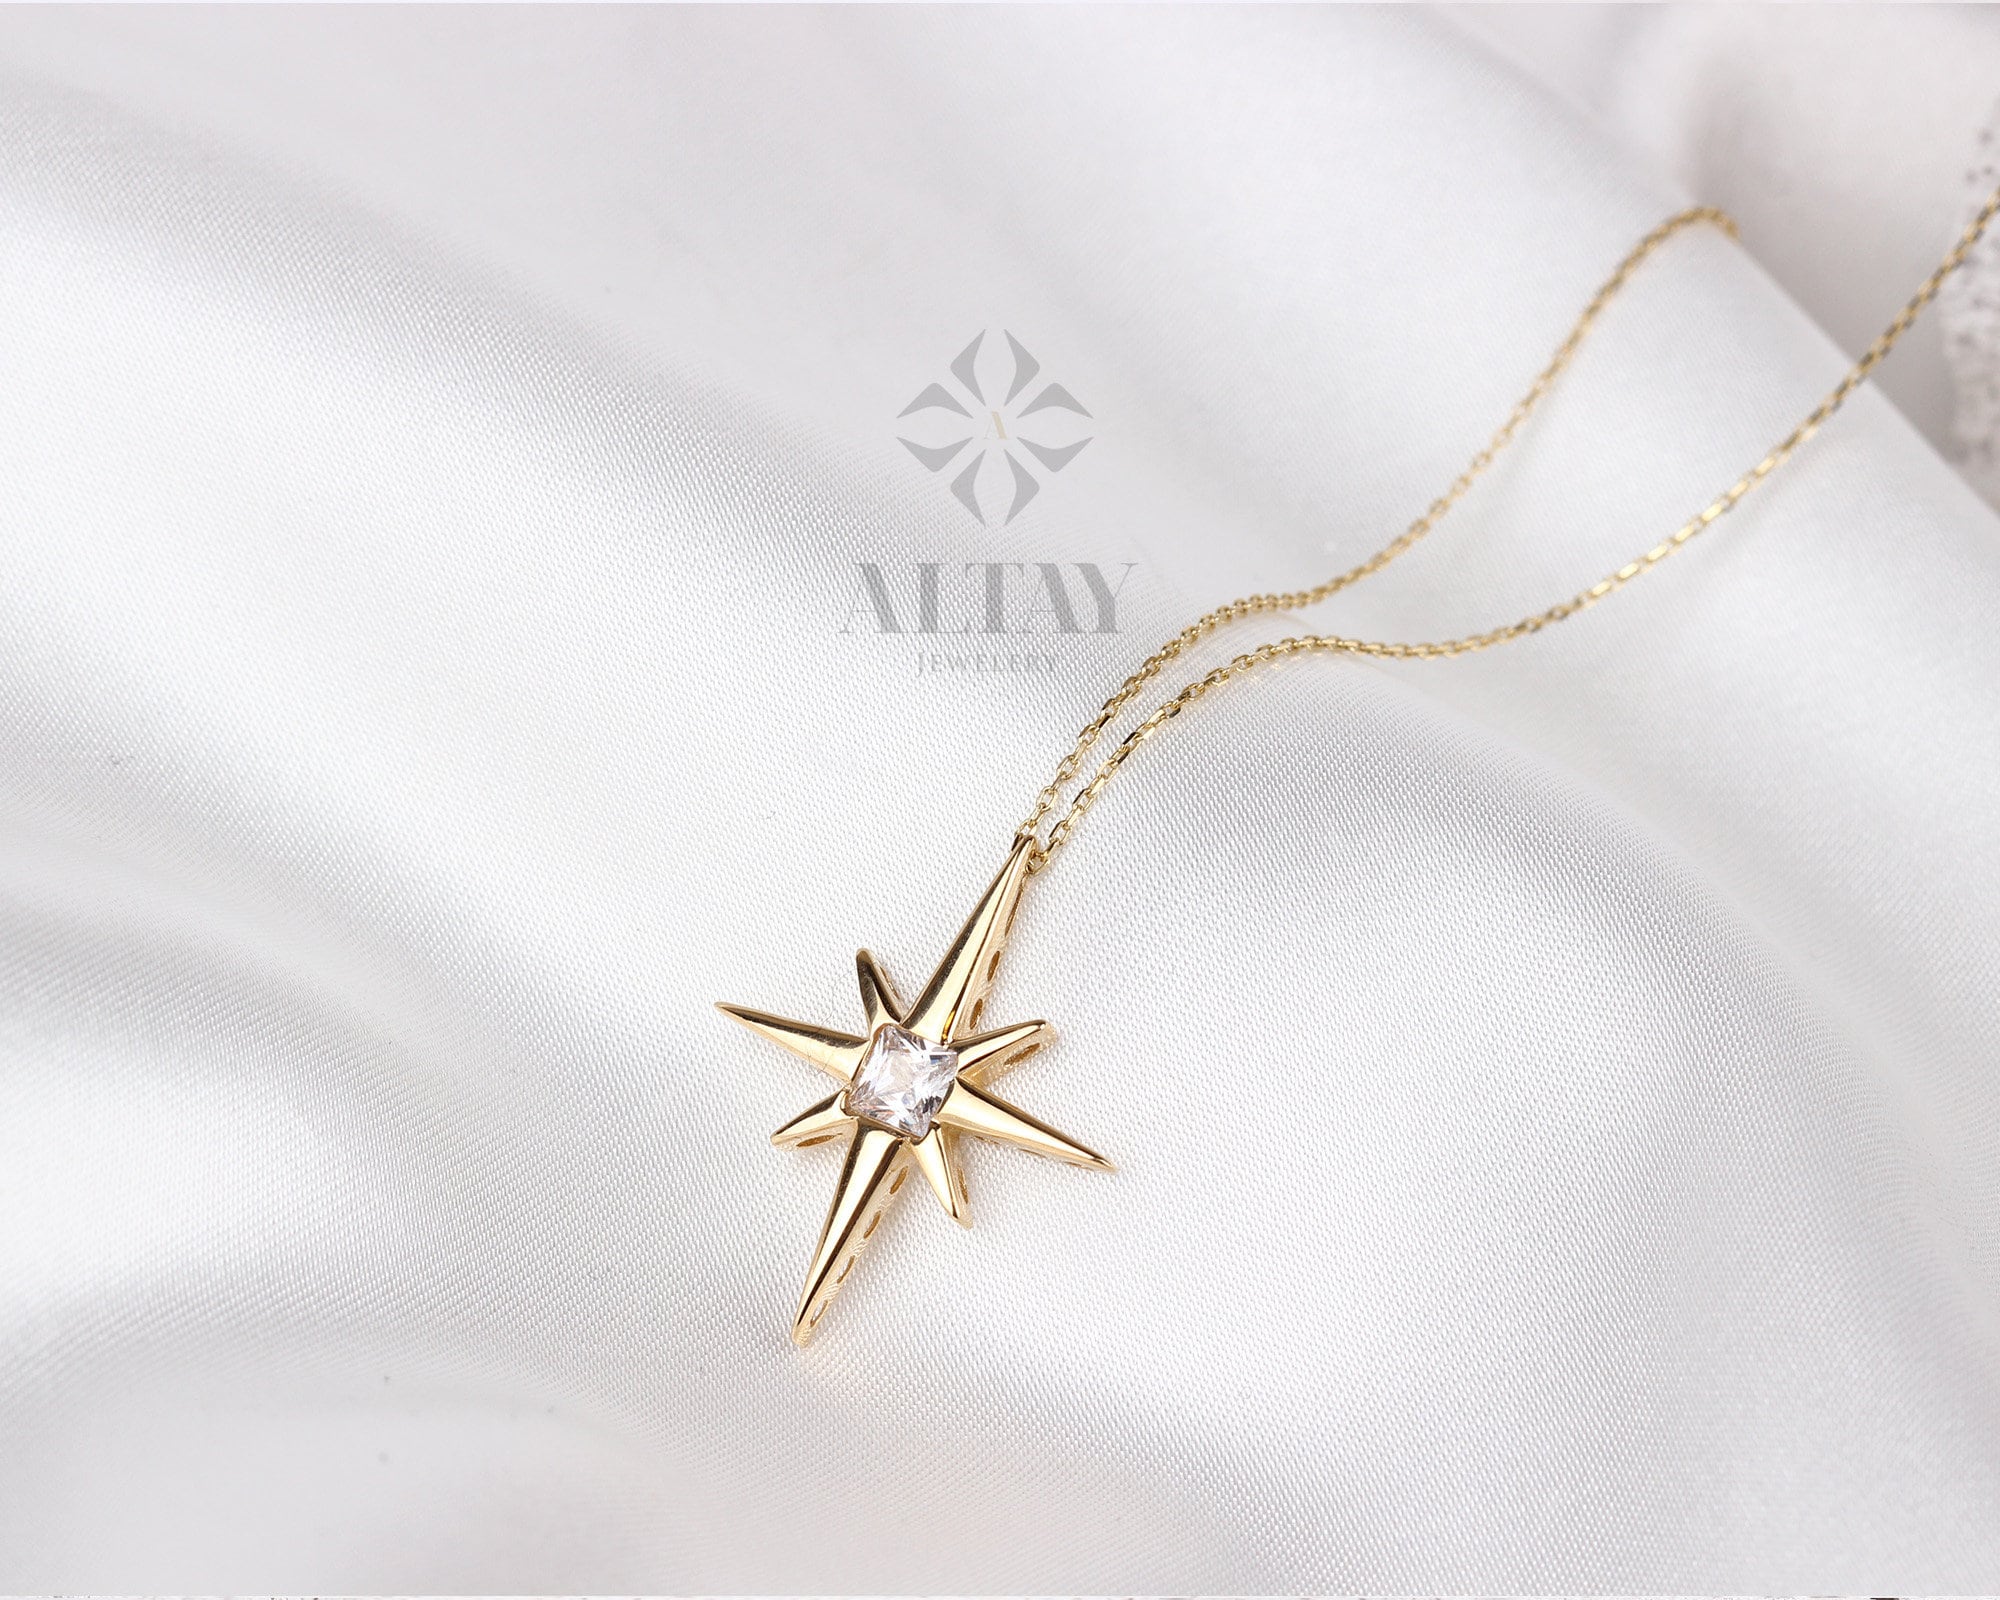 14K Gold North Star Necklace, Celestial North Star Pendant, Gift for Her, Minimalist, Dainty Layering Chain, Christmas, Valentines Day Gift